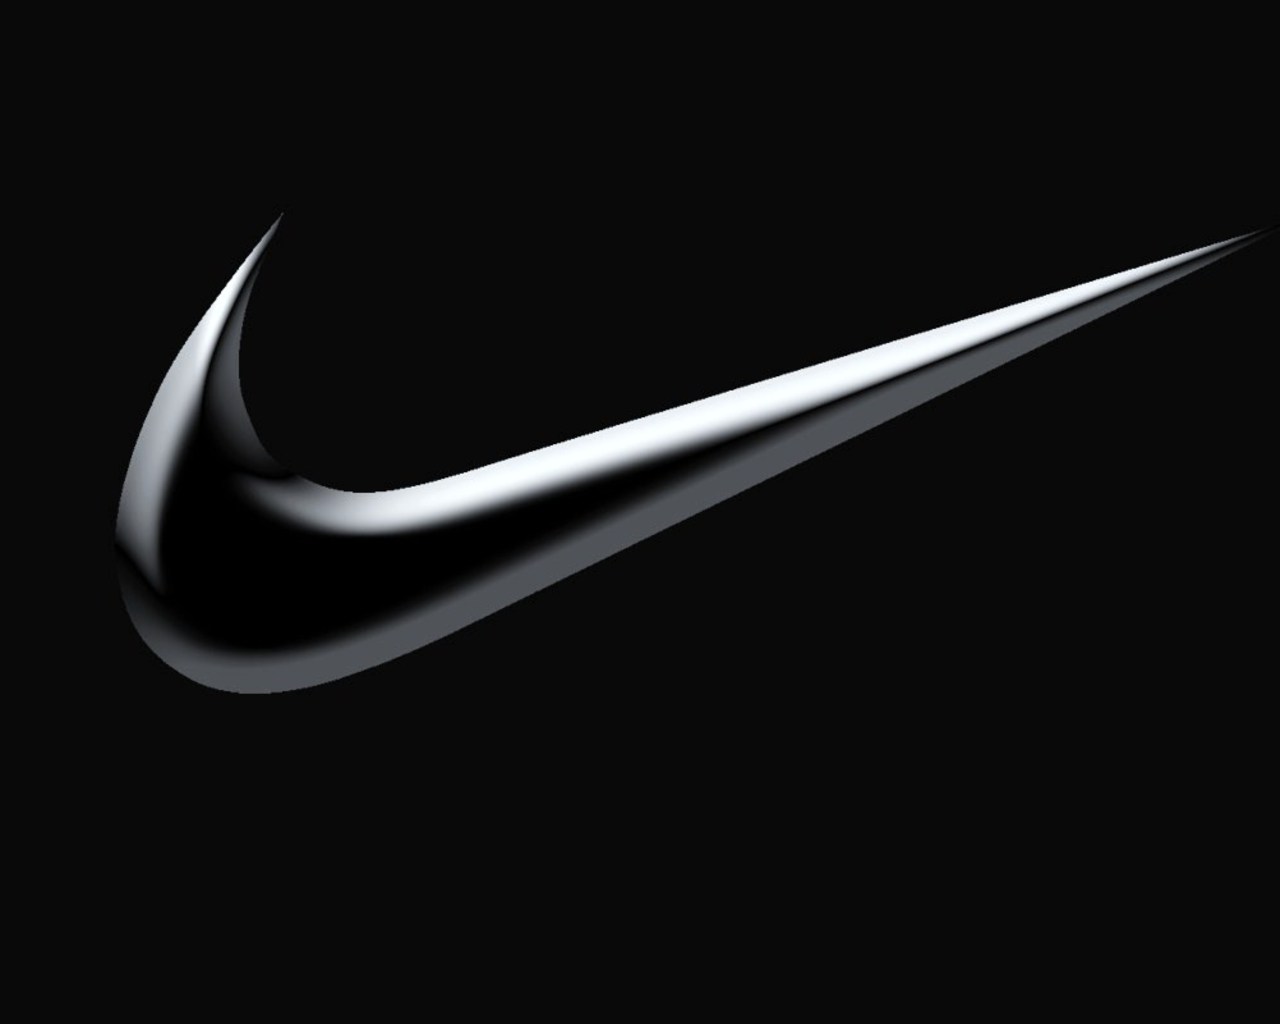 New Nike Logo HQ Wallpapers | World's Greatest Art Site